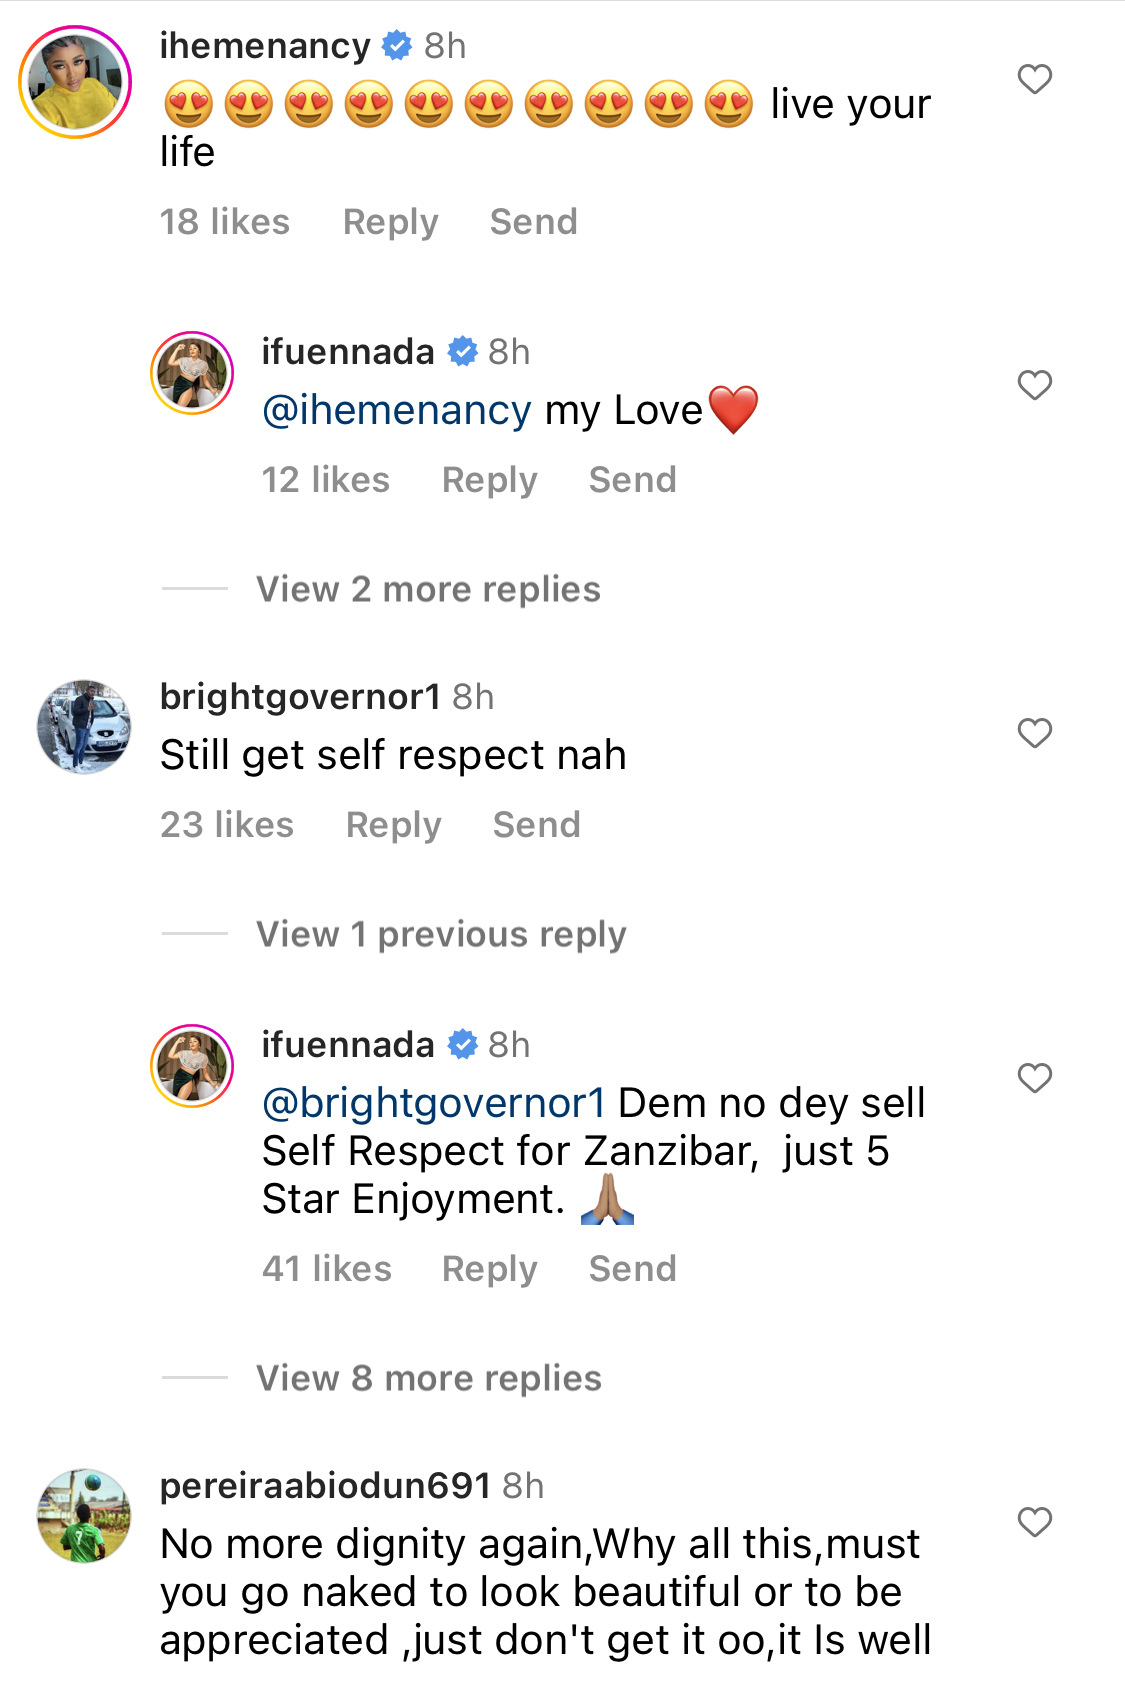 Rihanna did it too and she’s a billionaire - BBNaija Ifu Ennada defends topless photos as fans drag her